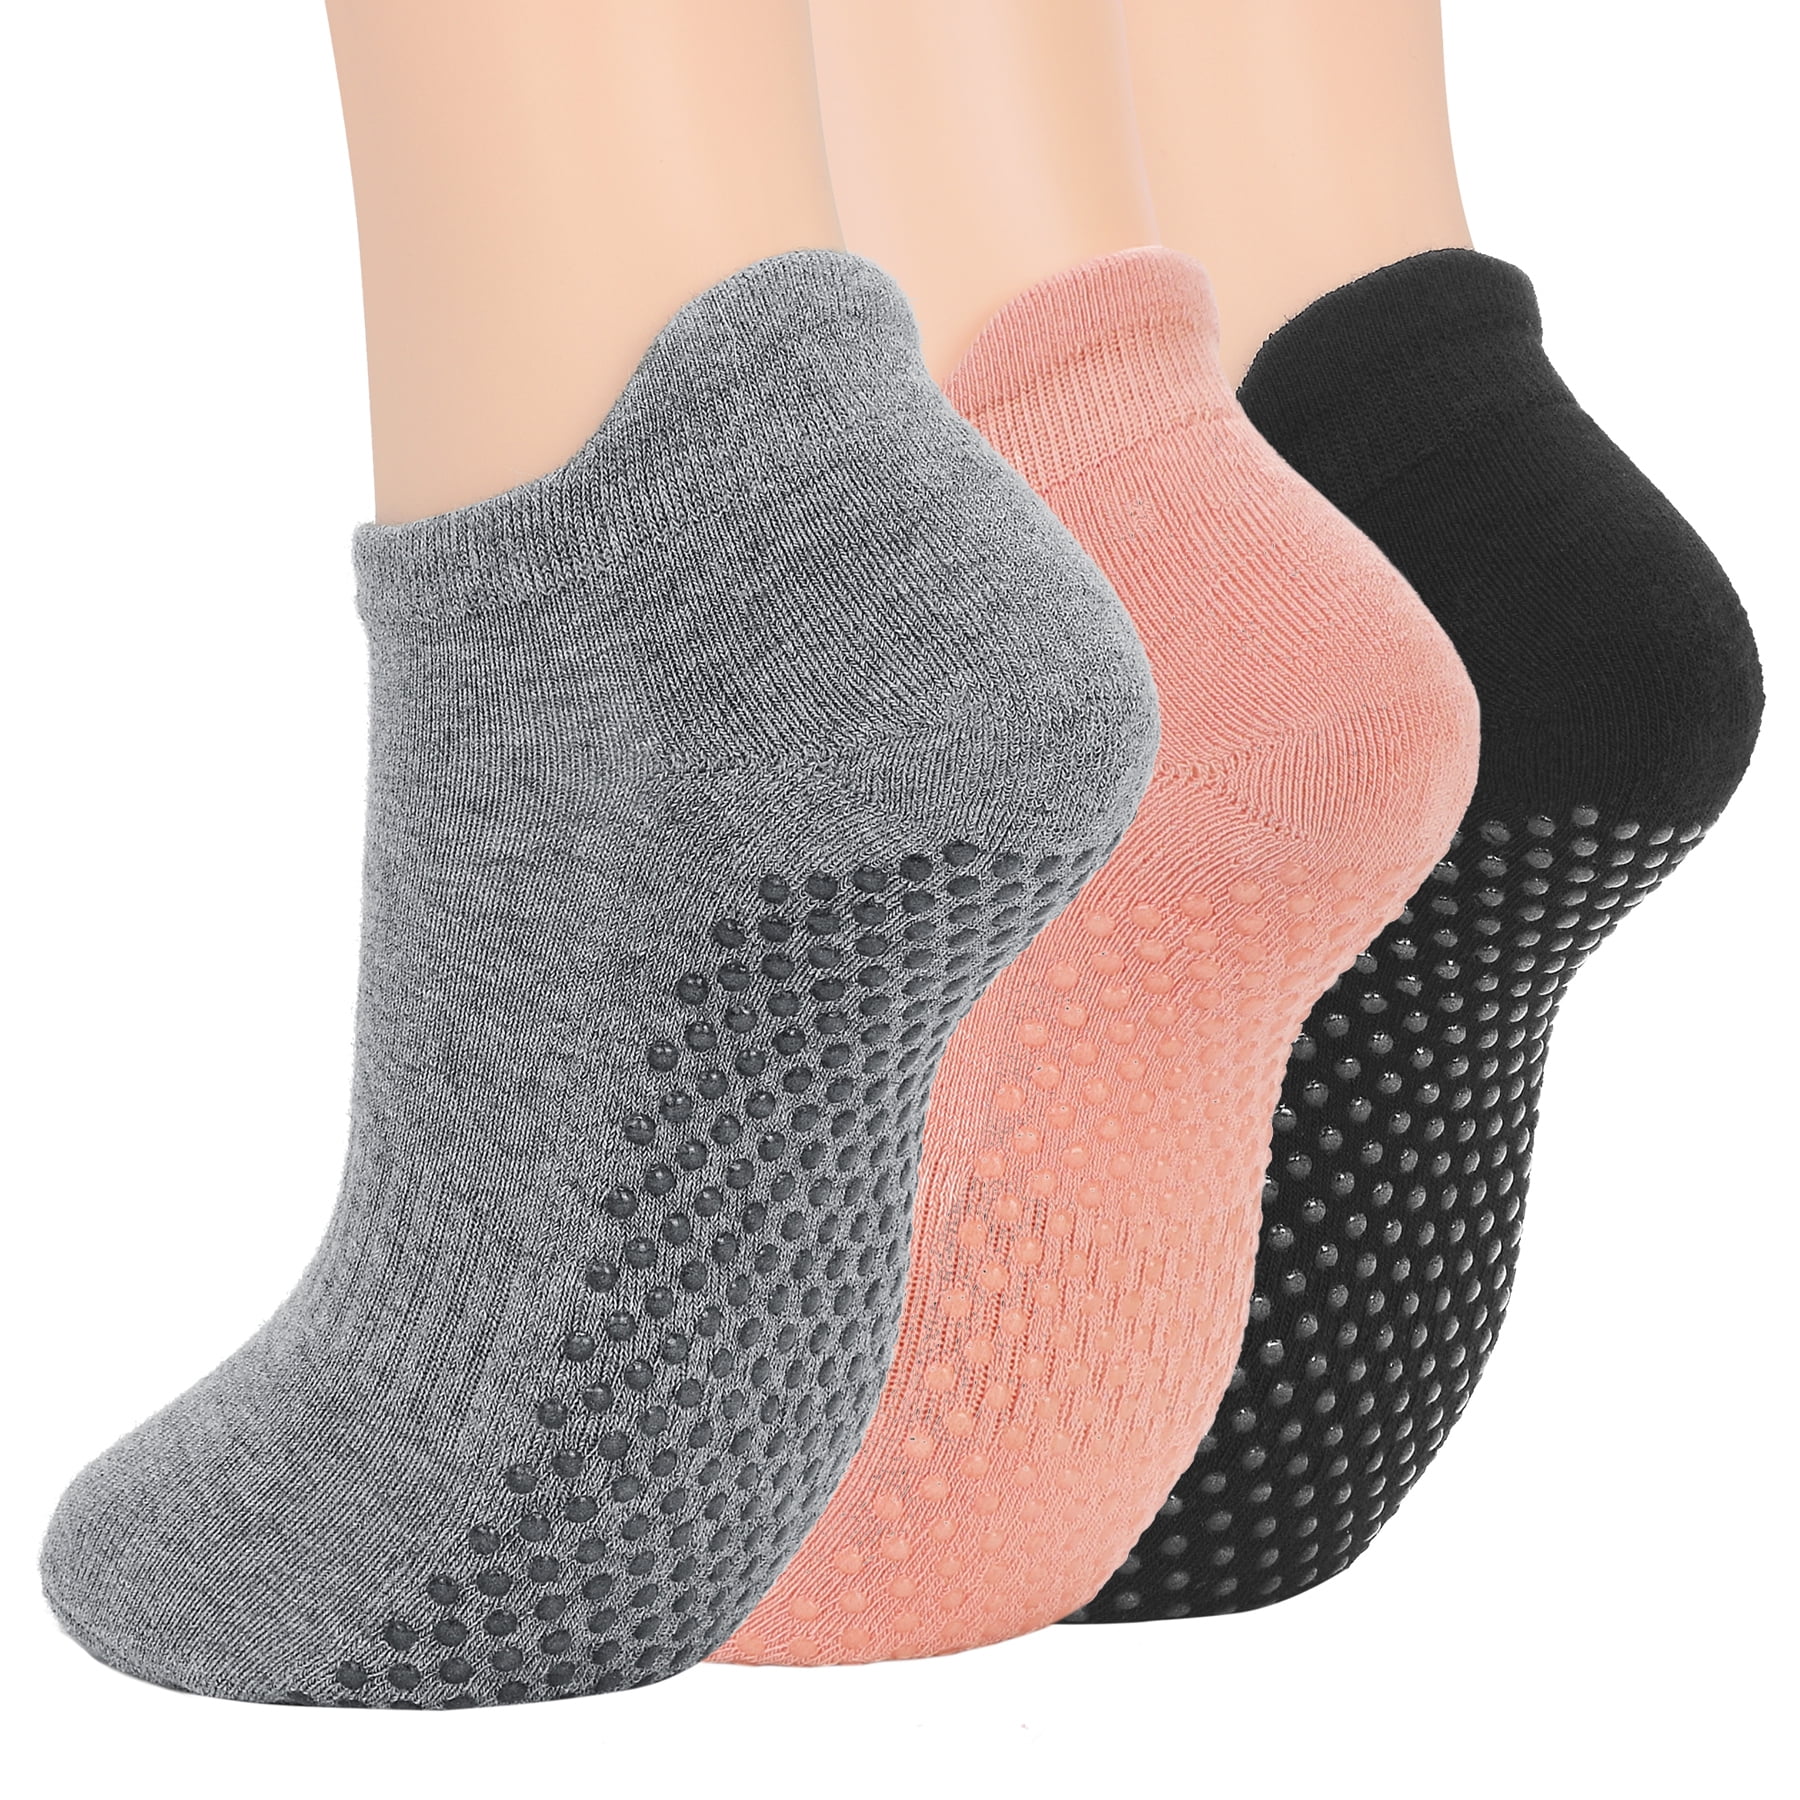 Buy Grippy Fit Yoga Socks - Non Slip Sticky Gripper Socks - Accessories for  Women & Men - Sweat Resistant - for Pilates, Yoga, Dance, Workouts, and  General Fitness - Black, One